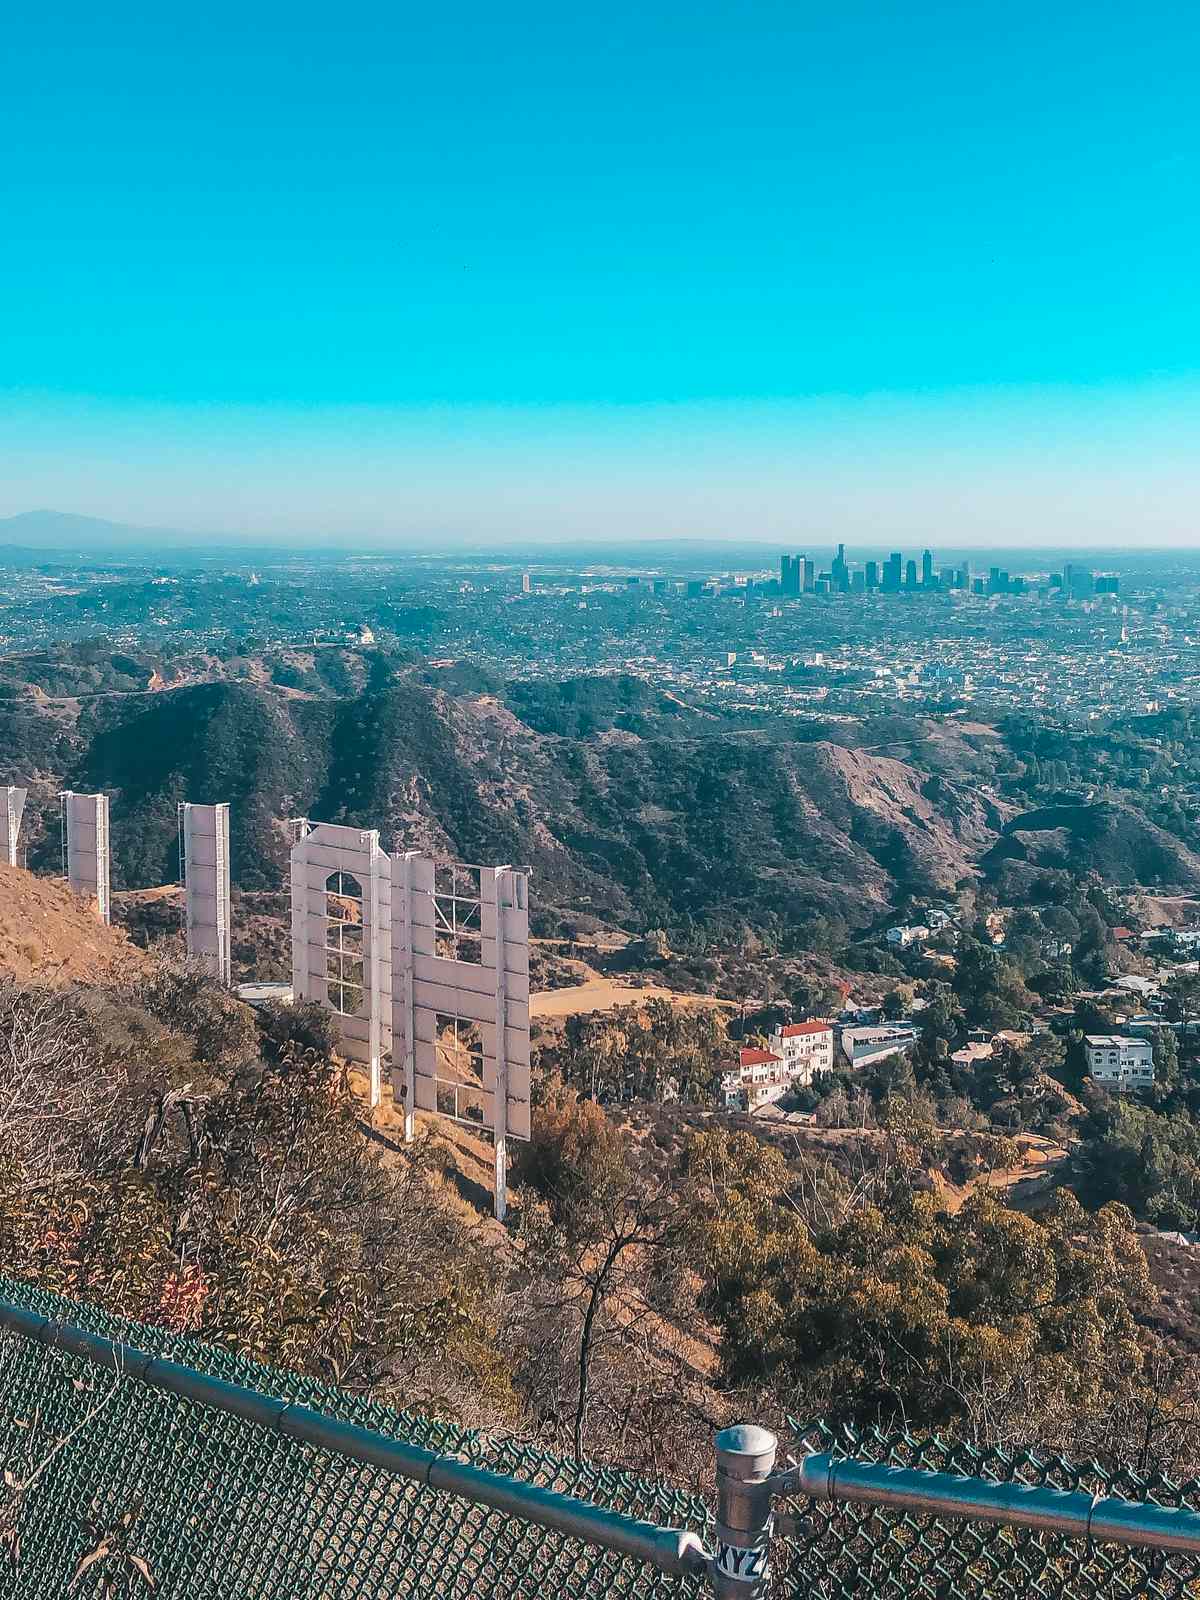 Hike that goes behind the Hollywood sign in Los Angeles